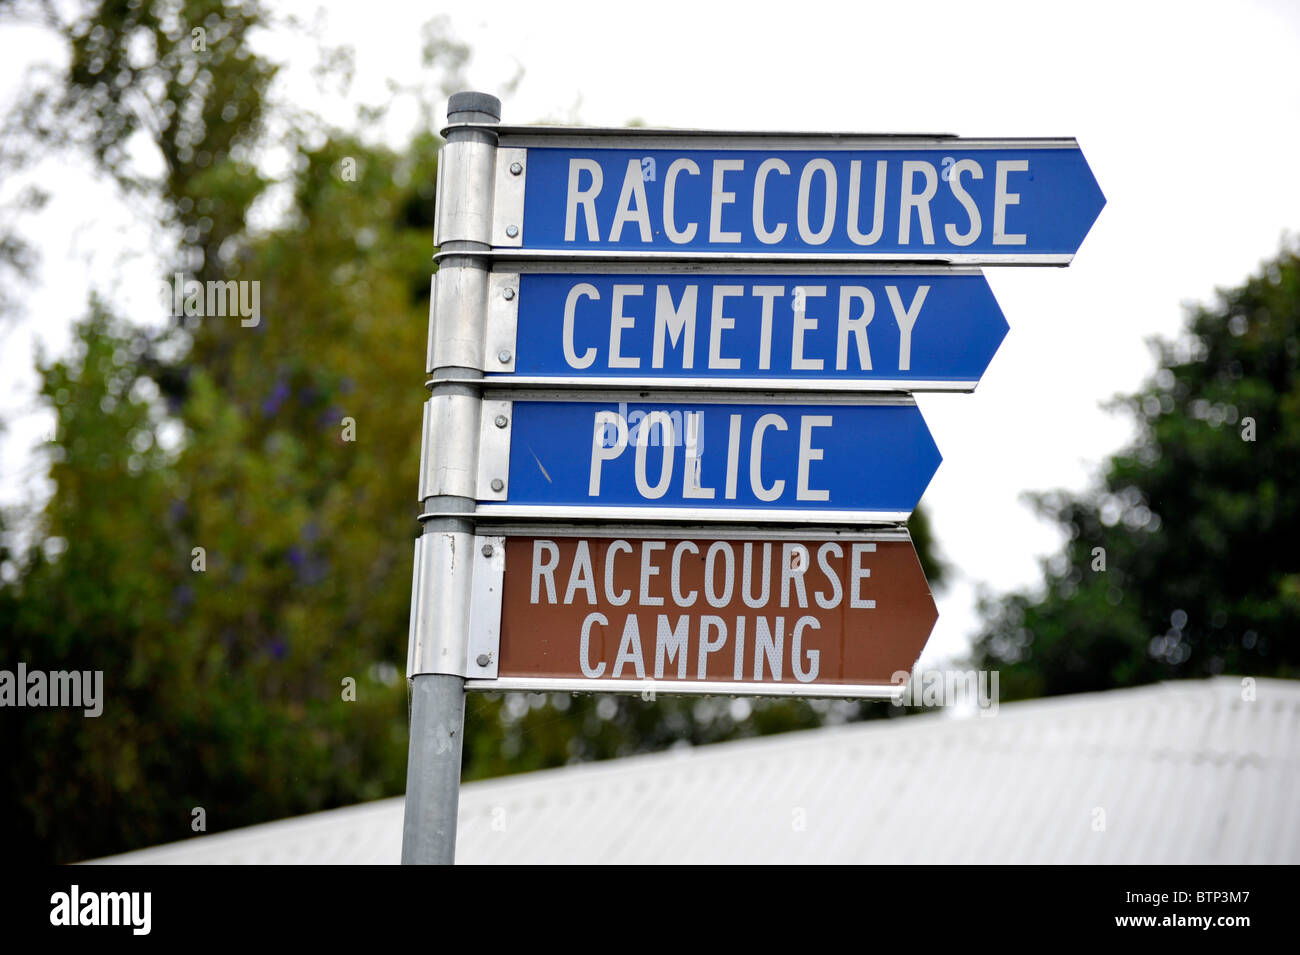 Racecourse cemetery police and camping all the facilities one might need in a small town in New South Wales Australia Stock Photo